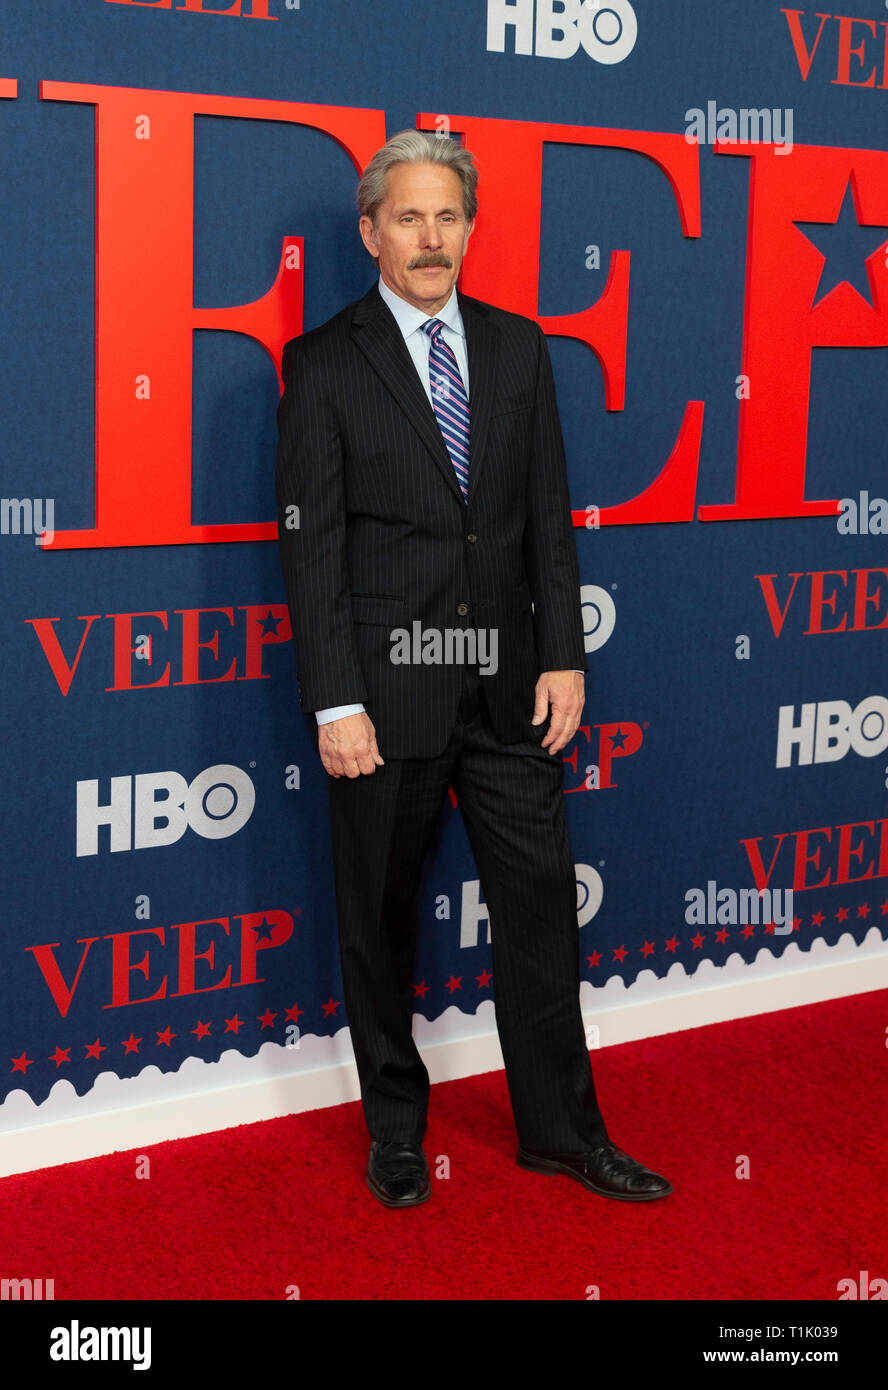 New York, United States. 26th Mar, 2019. New York, NY - March 26, 2019: Gary Cole attends HBO premiere of VEEP final season at Alice Tully Hall Credit: lev radin/Alamy Live News Stock Photo